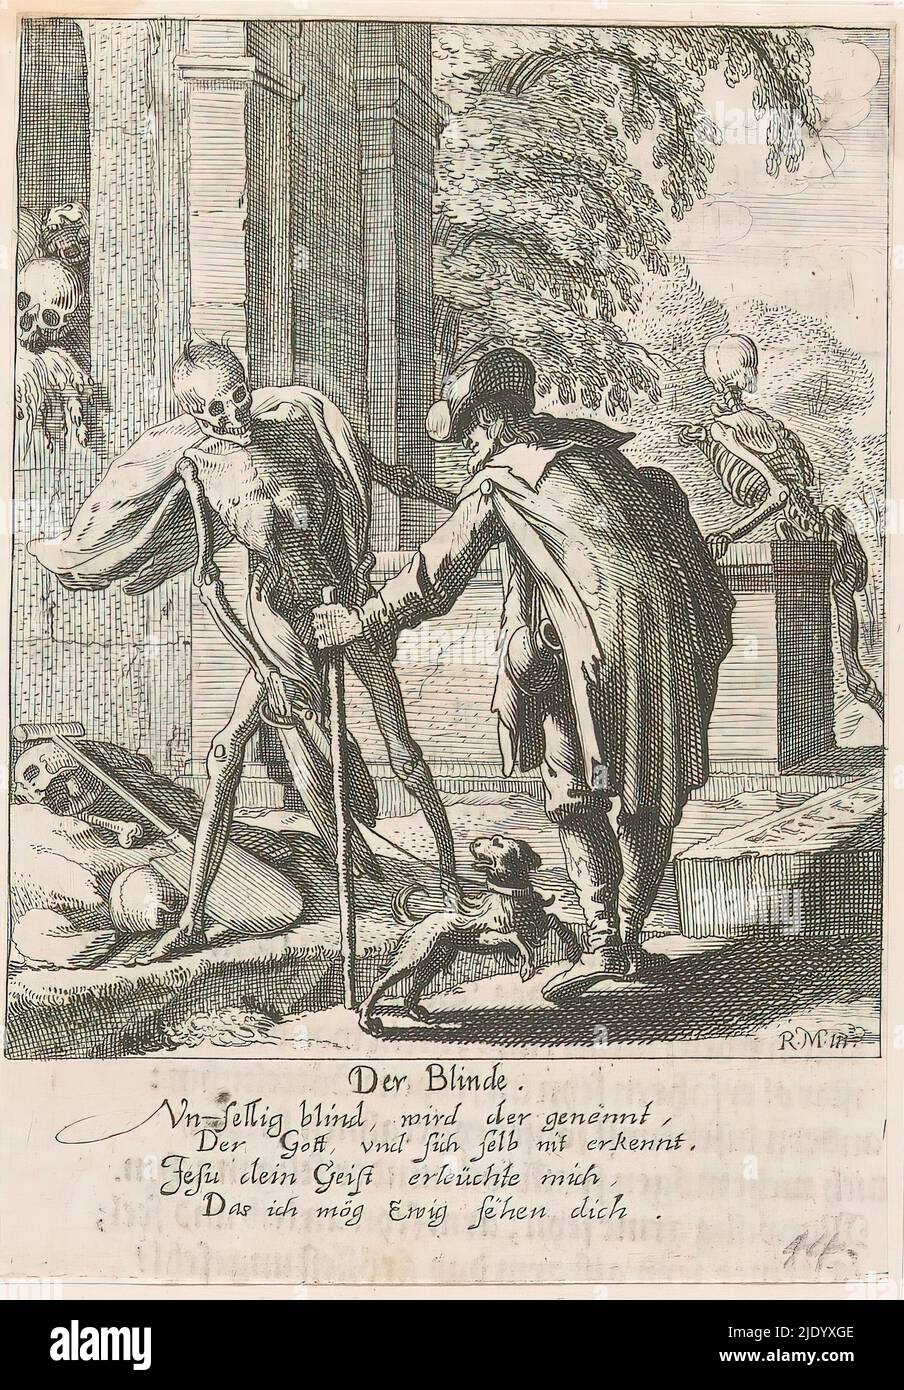 Blind man and Death, Der Blinde (title on object), The Dance of Death (series title), Blind man is led into an open grave by Death with a guide dog., print maker: Rudolph Meyer, print maker: Conrad Meyer, after design by: Rudolph Meyer, (mentioned on object), 1650, paper, etching, height 129 mm × width 90 mm Stock Photo